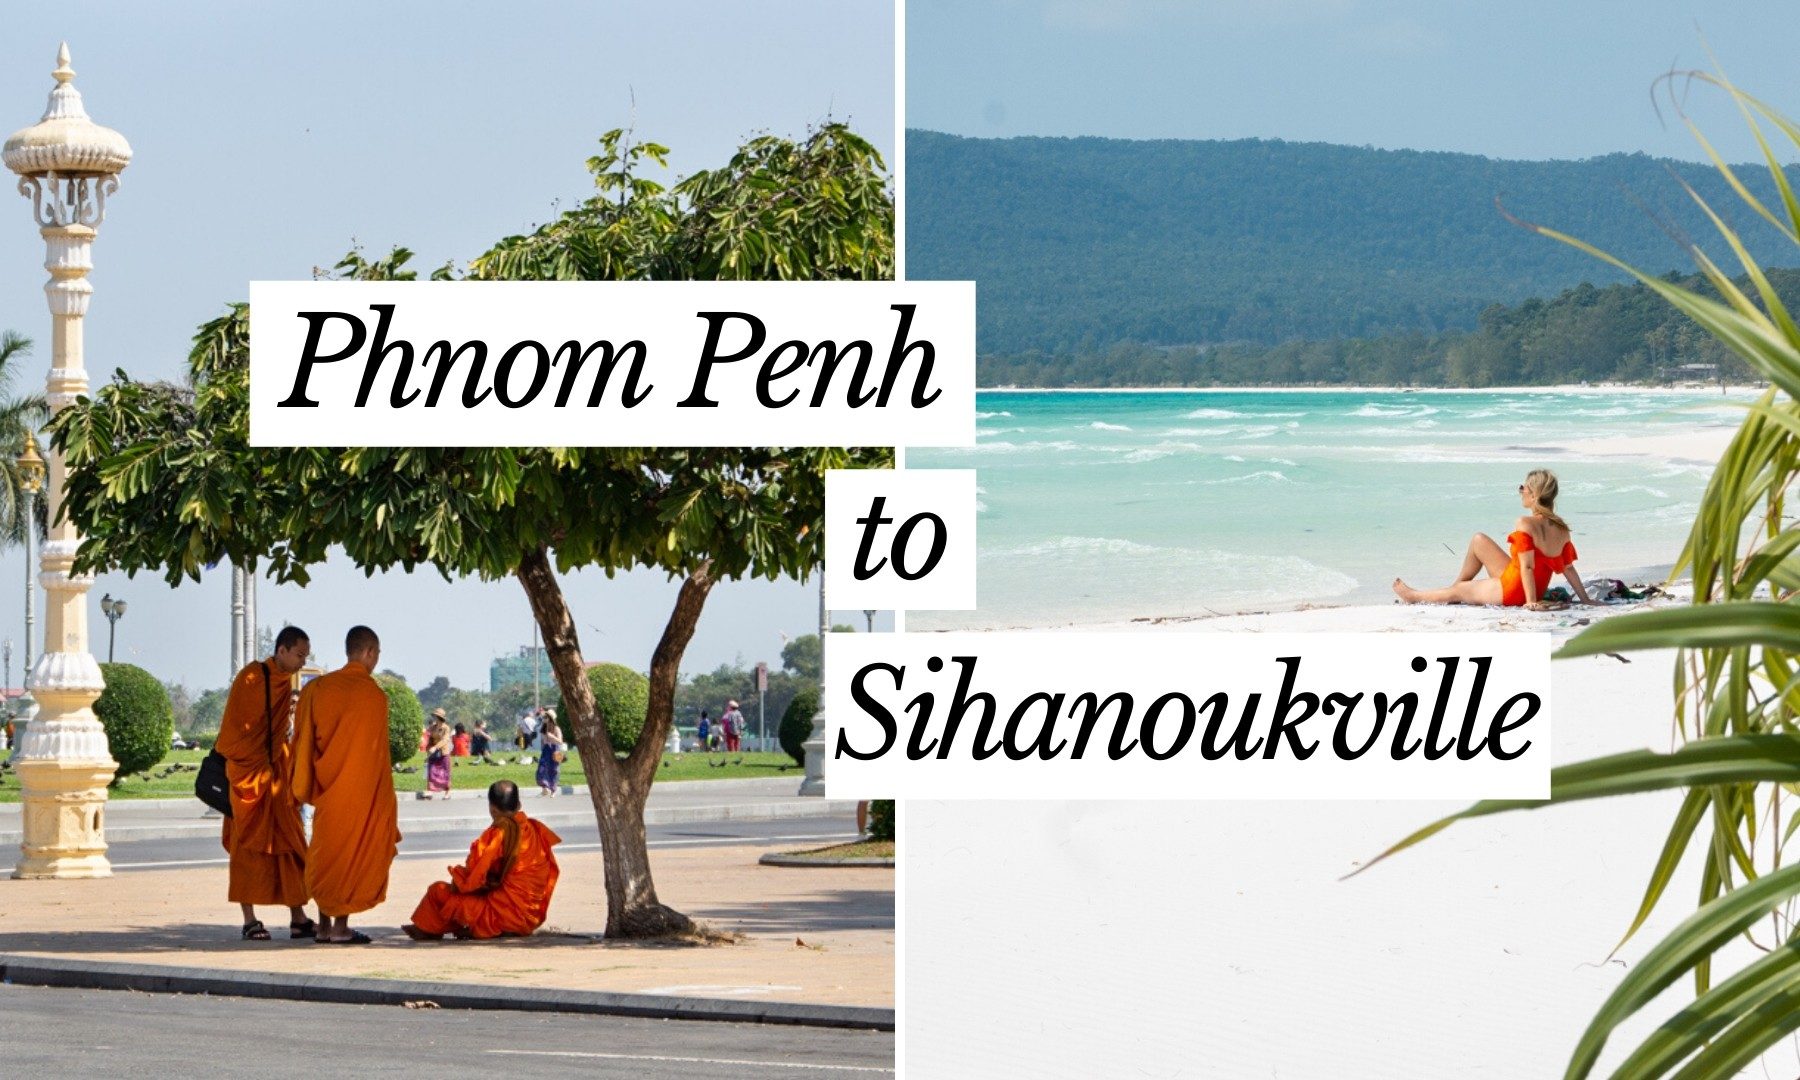 How to Get From Phnom Penh to Sihanoukville, Cambodia